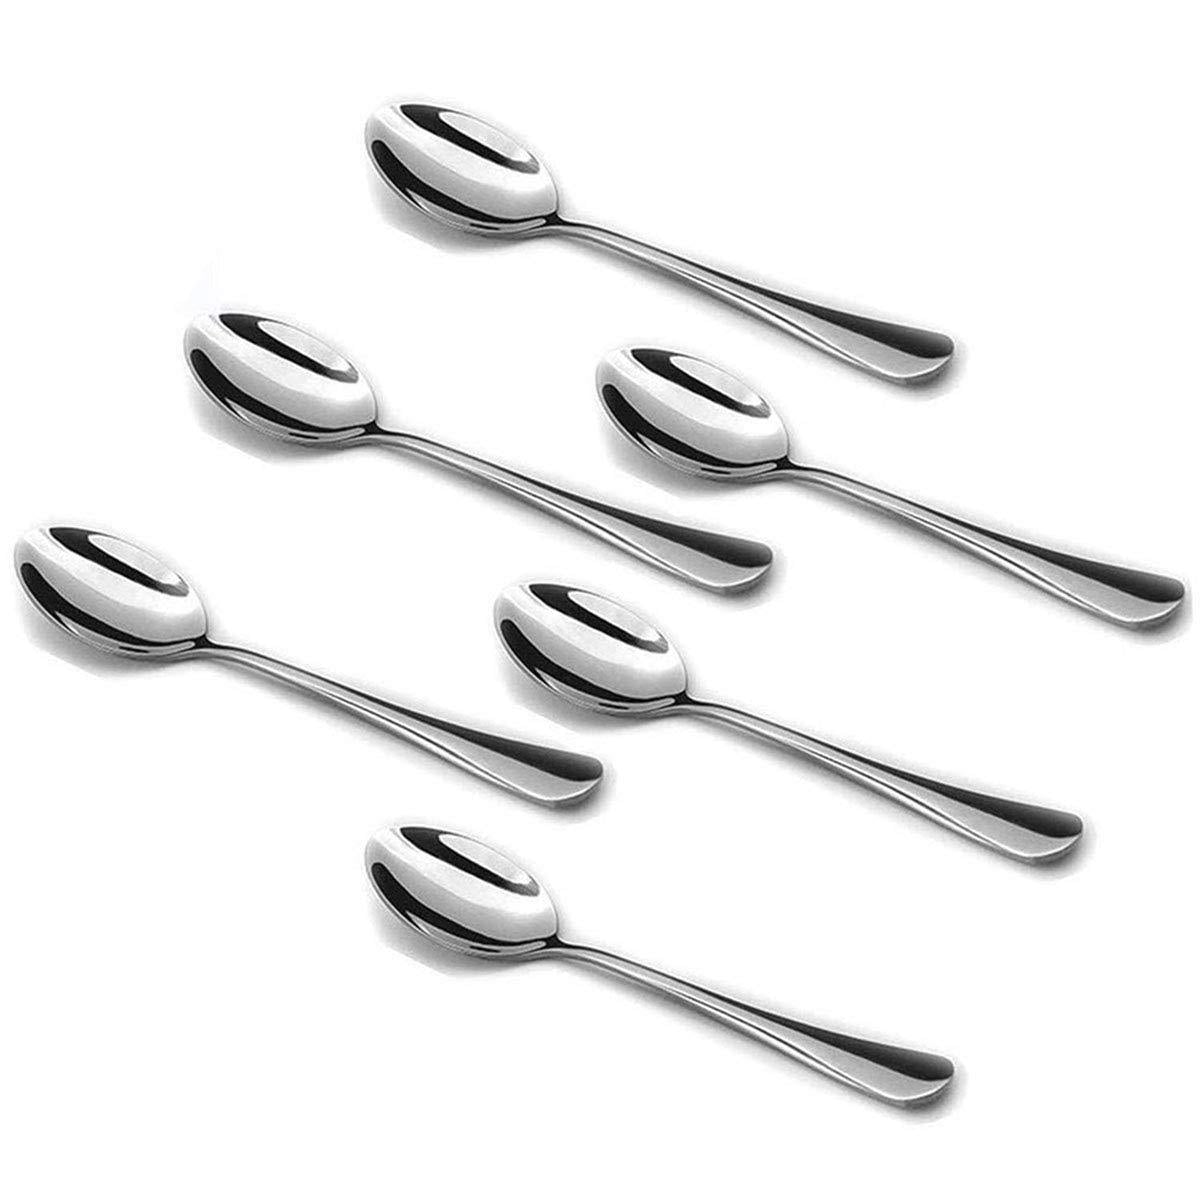 Buyer Star 12-Pieces Silver Stainless Steel Teaspoons 5.5-Inch Mini Coffee Spoons Metal Small Demitasse Espresso Spoons